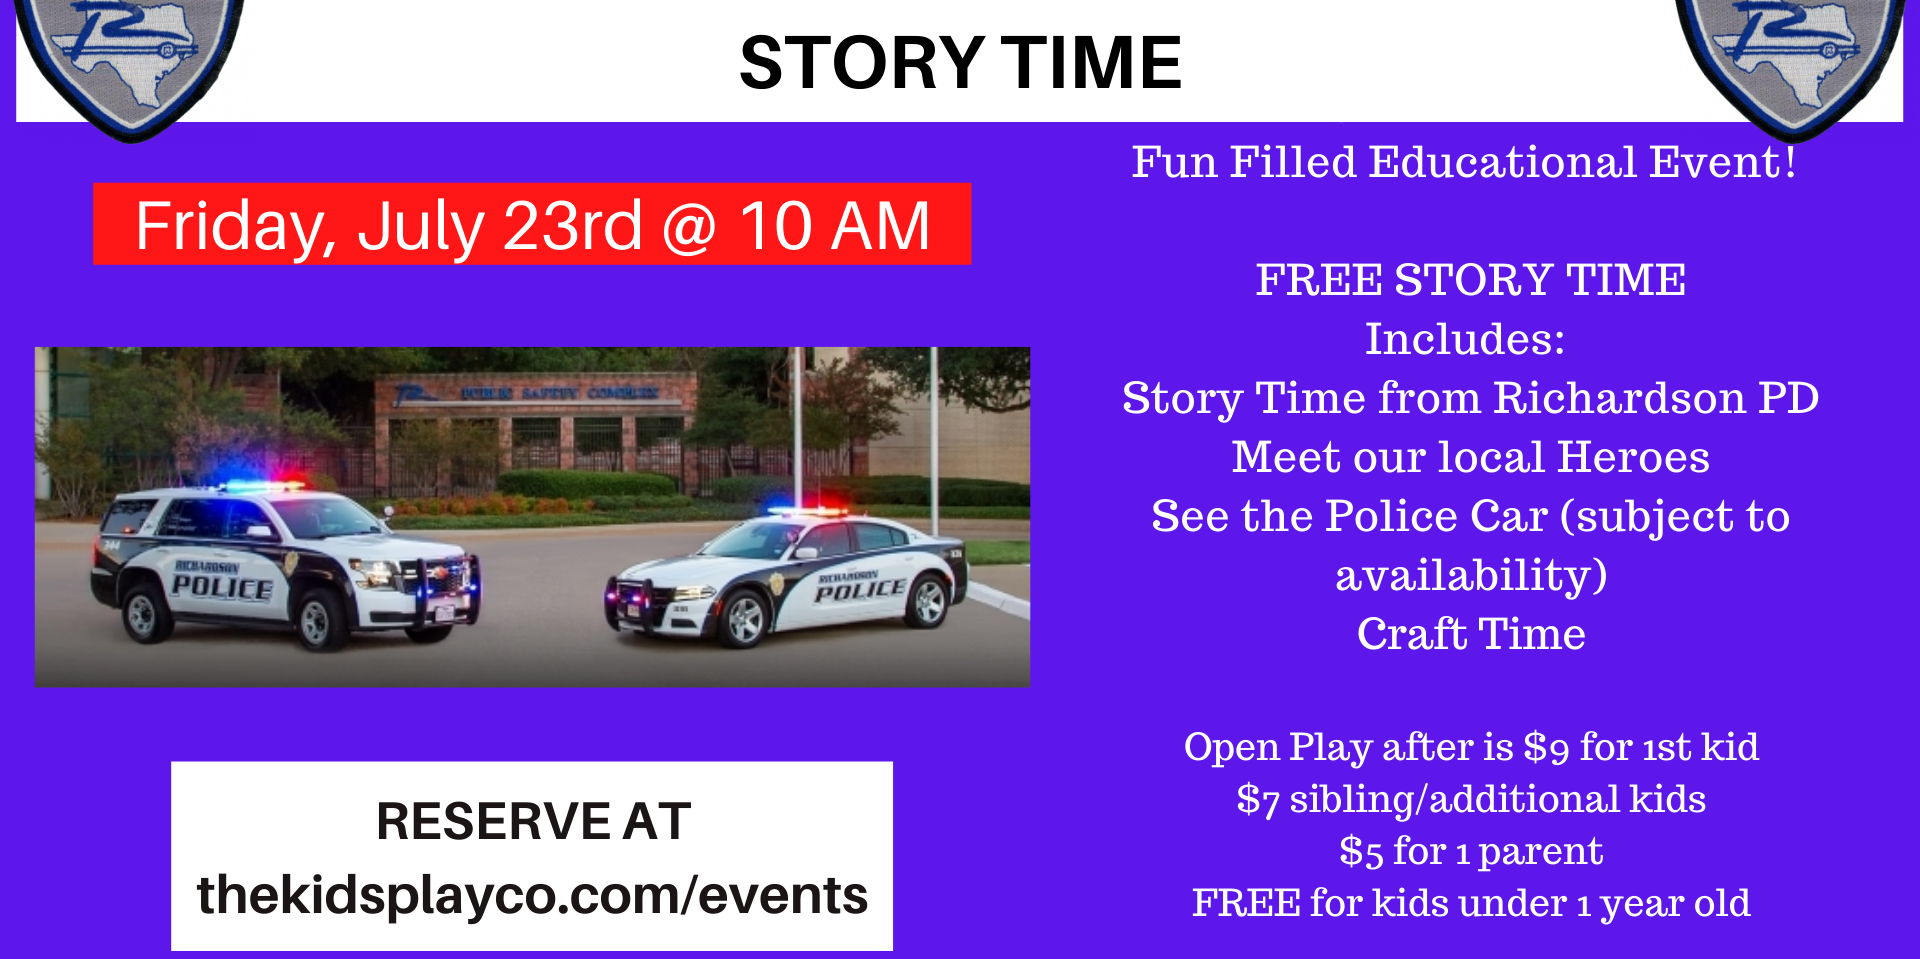 Story Time with Richardson Police Department - Part of Heroes Week Summer Camp promotional image